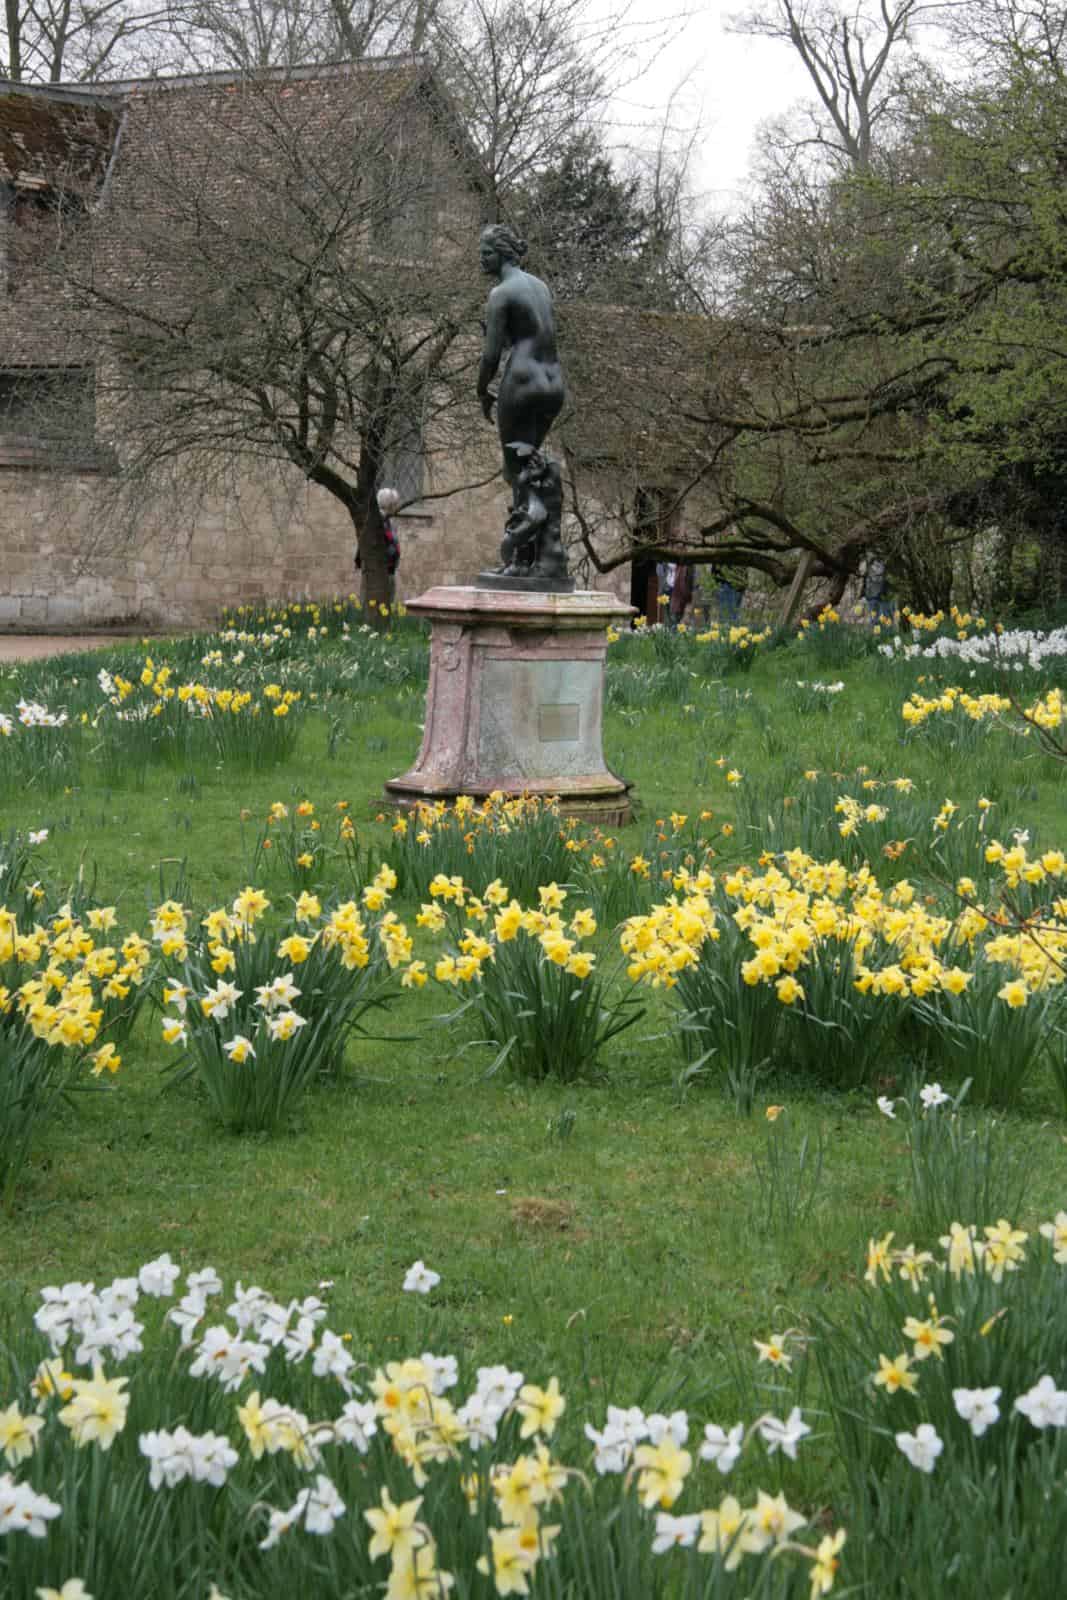 bulb meadow hides under a traditional lawn and emerges in the spring. This is called a stinzenplanten,